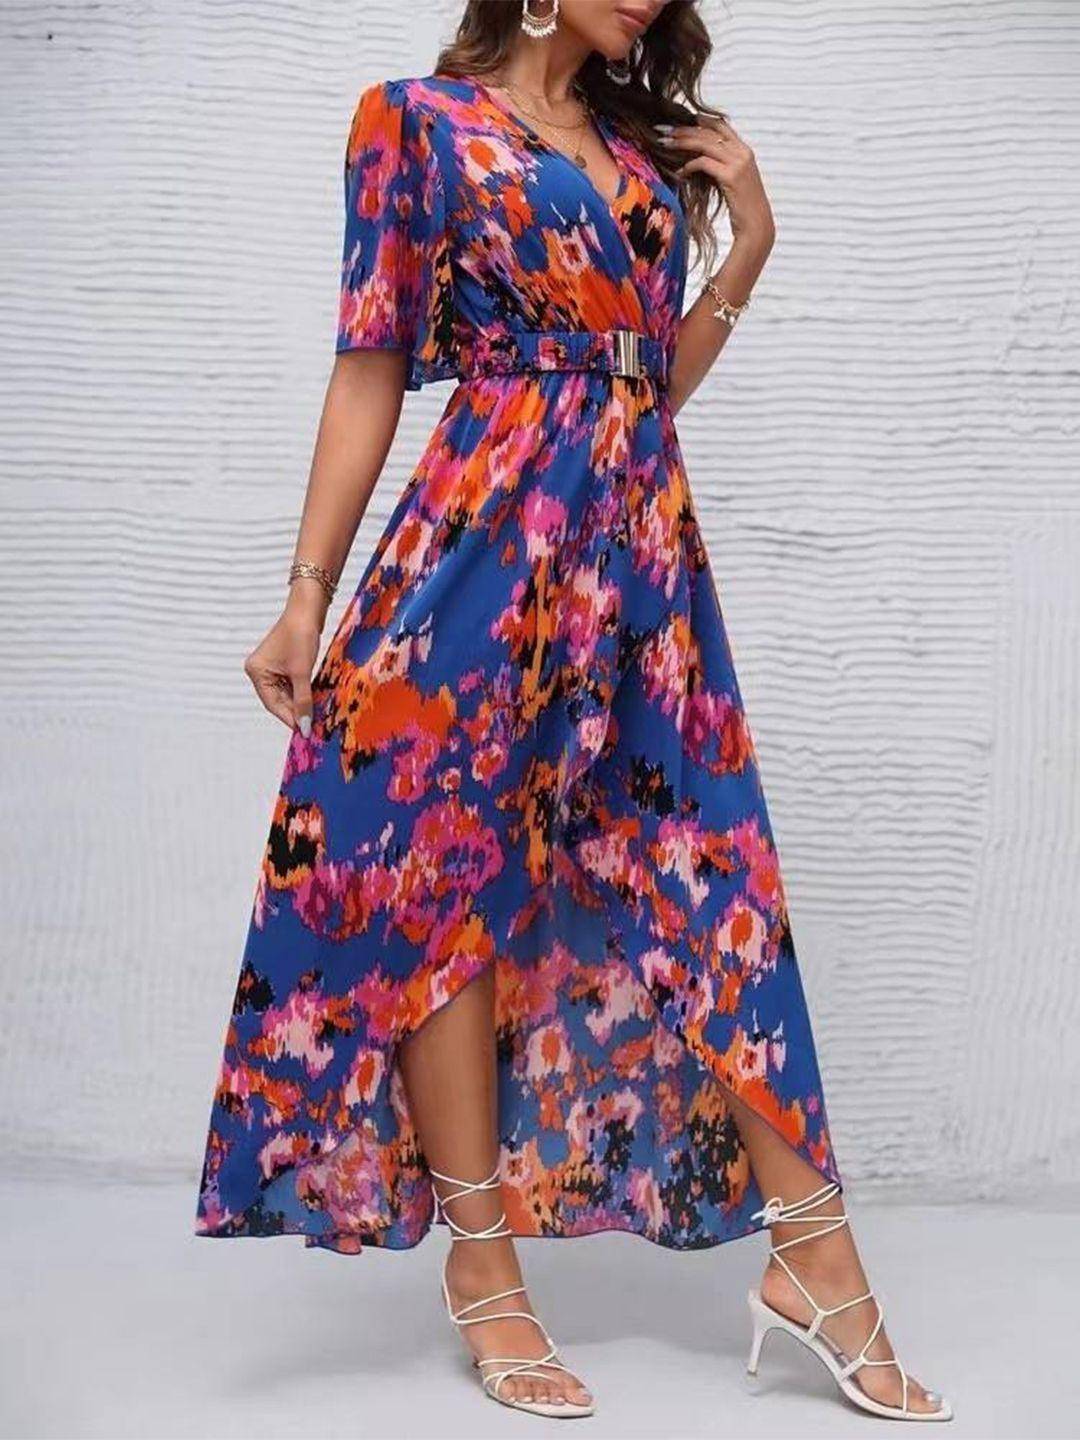 stylecast-blue-&-orange-tie-and-dye-printed-v-neck-short-sleeve-casual-a-line-maxi-dress